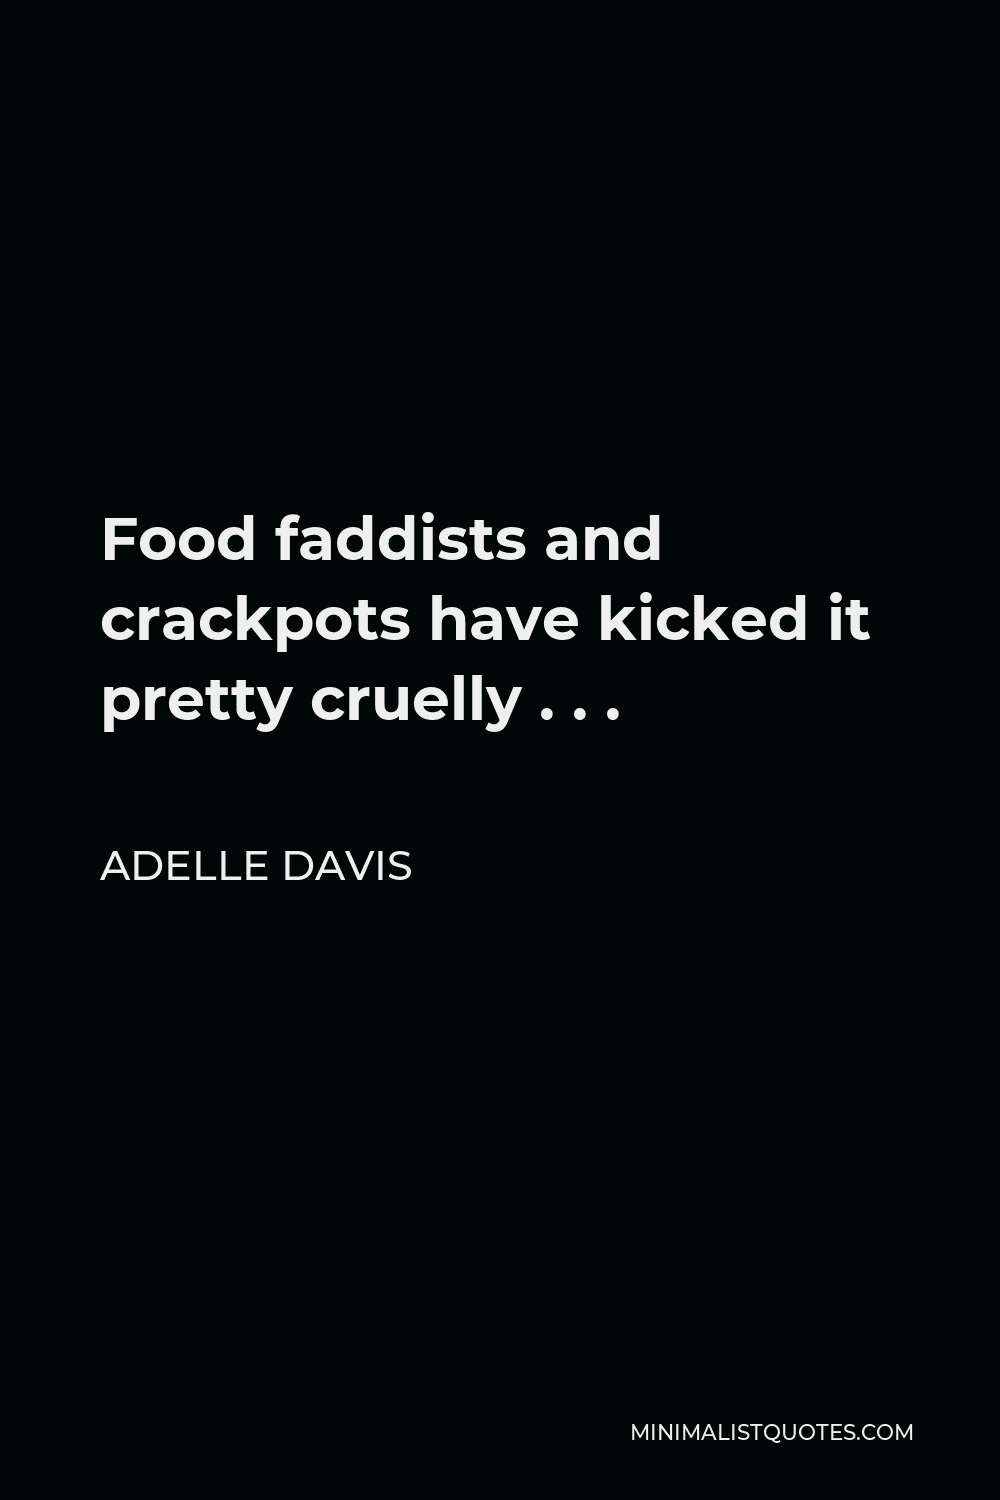 Adelle Davis Quote - Food faddists and crackpots have kicked it pretty cruelly . . .